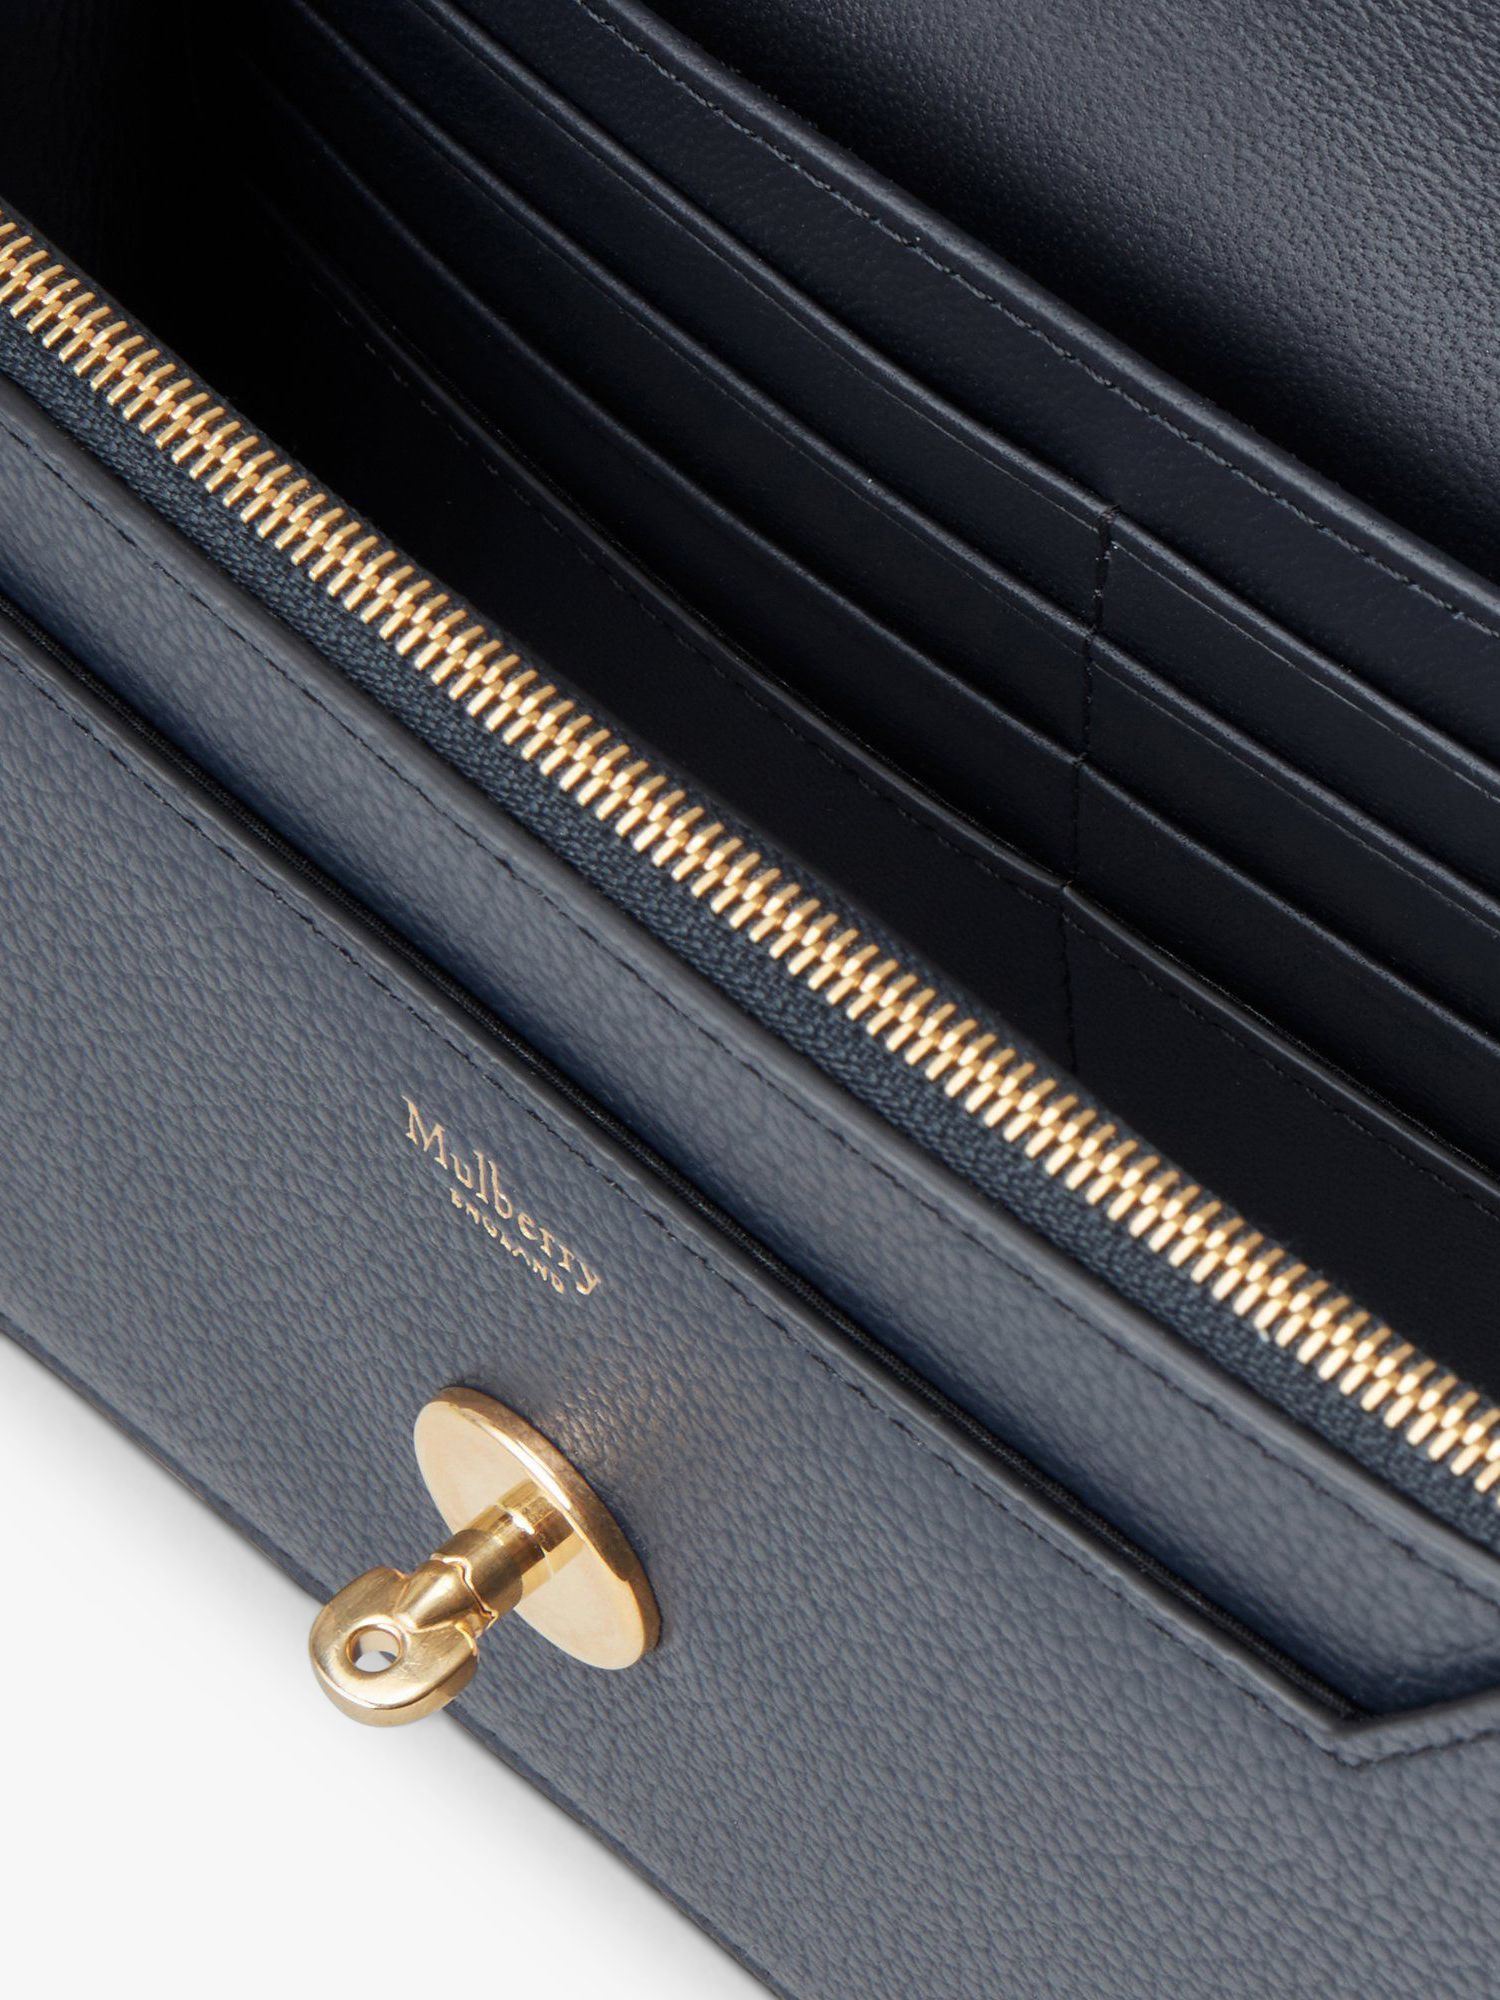 Mulberry Small Darley Small Classic Grain Leather Clutch Bag, Night Sky ...